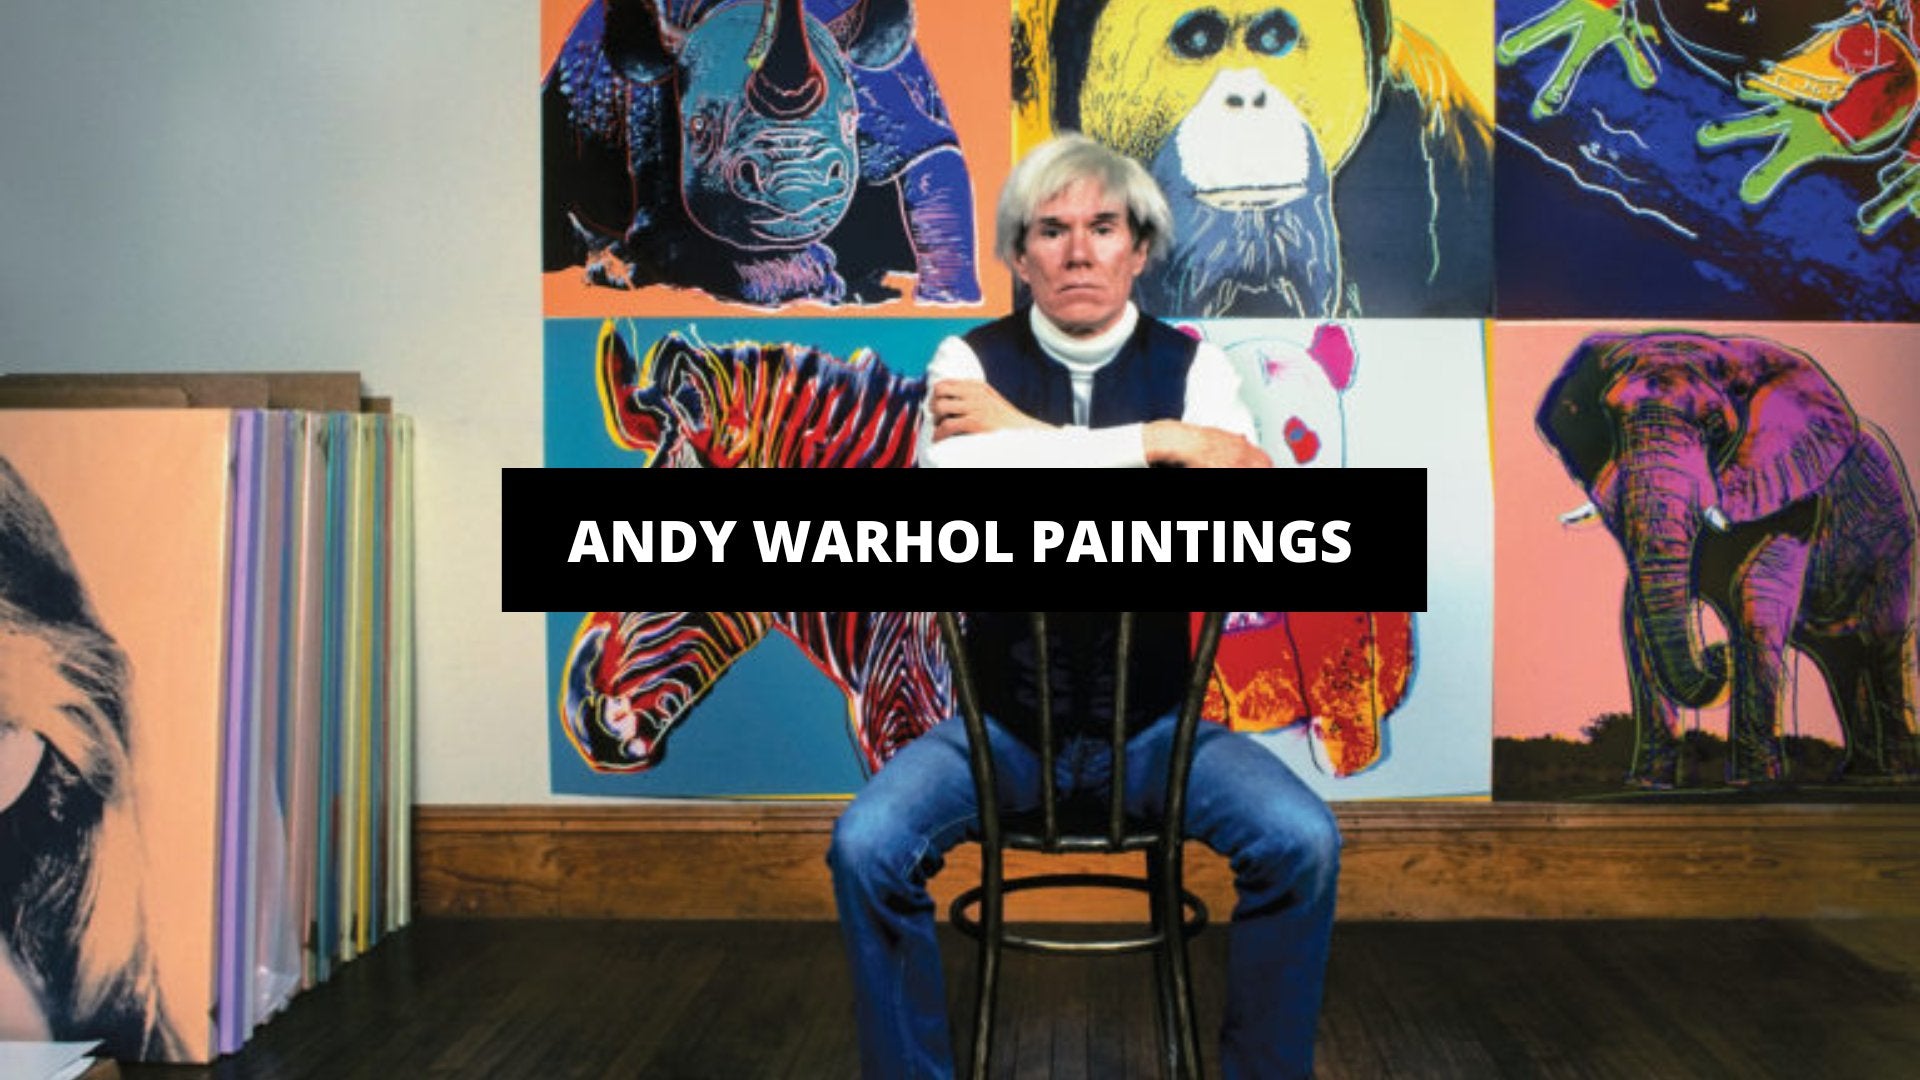 Andy Warhol Paintings - The Trendy Art